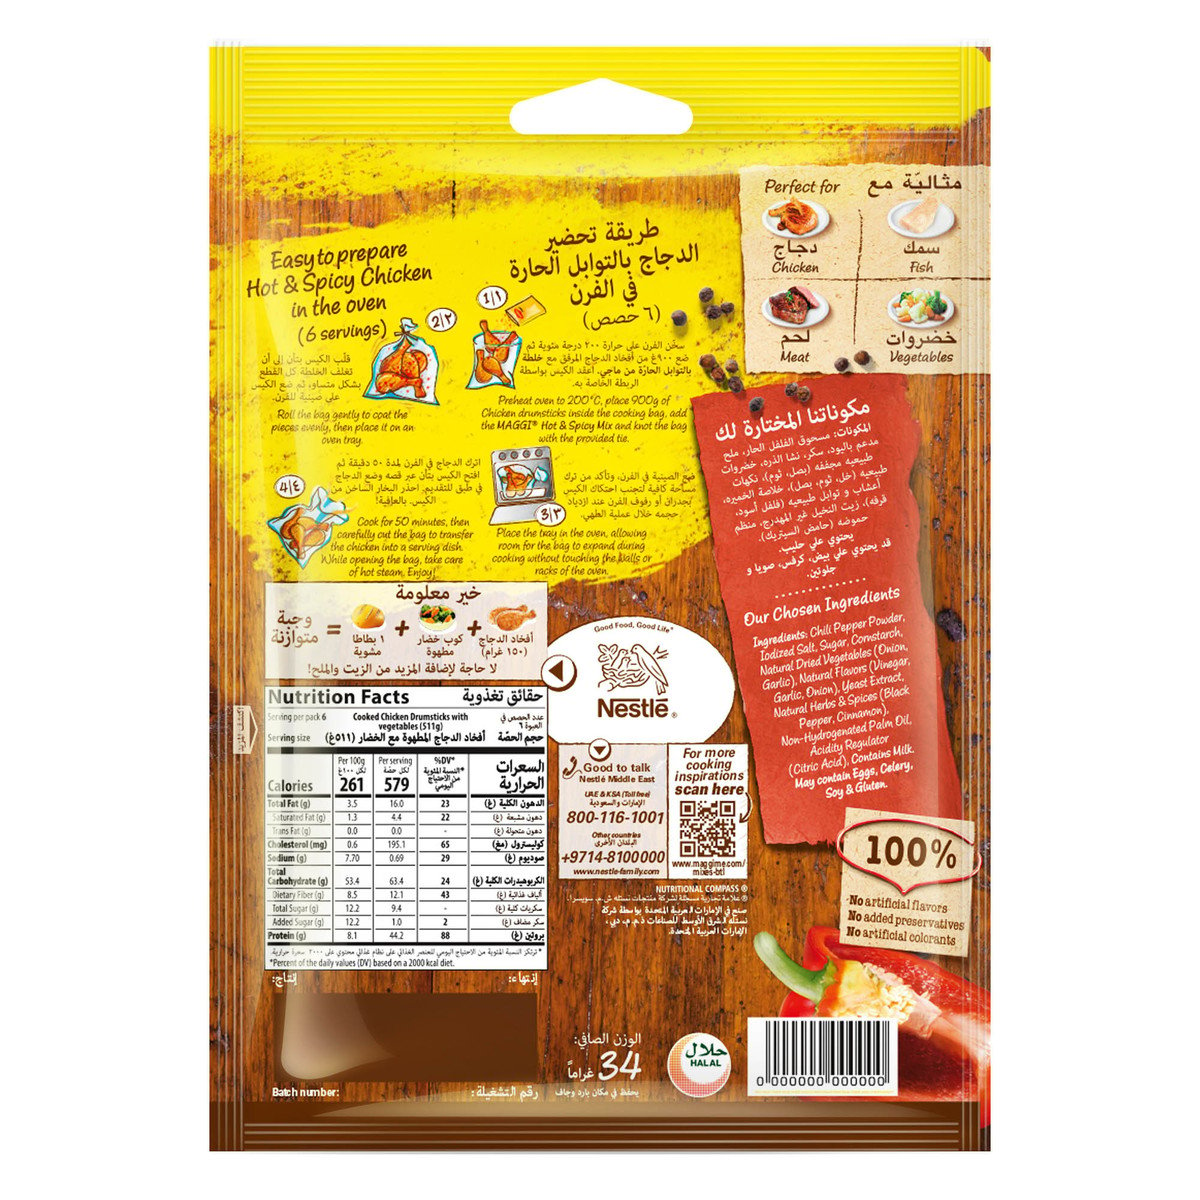 Maggi Hot and Spicy Cooking Mix 34 g